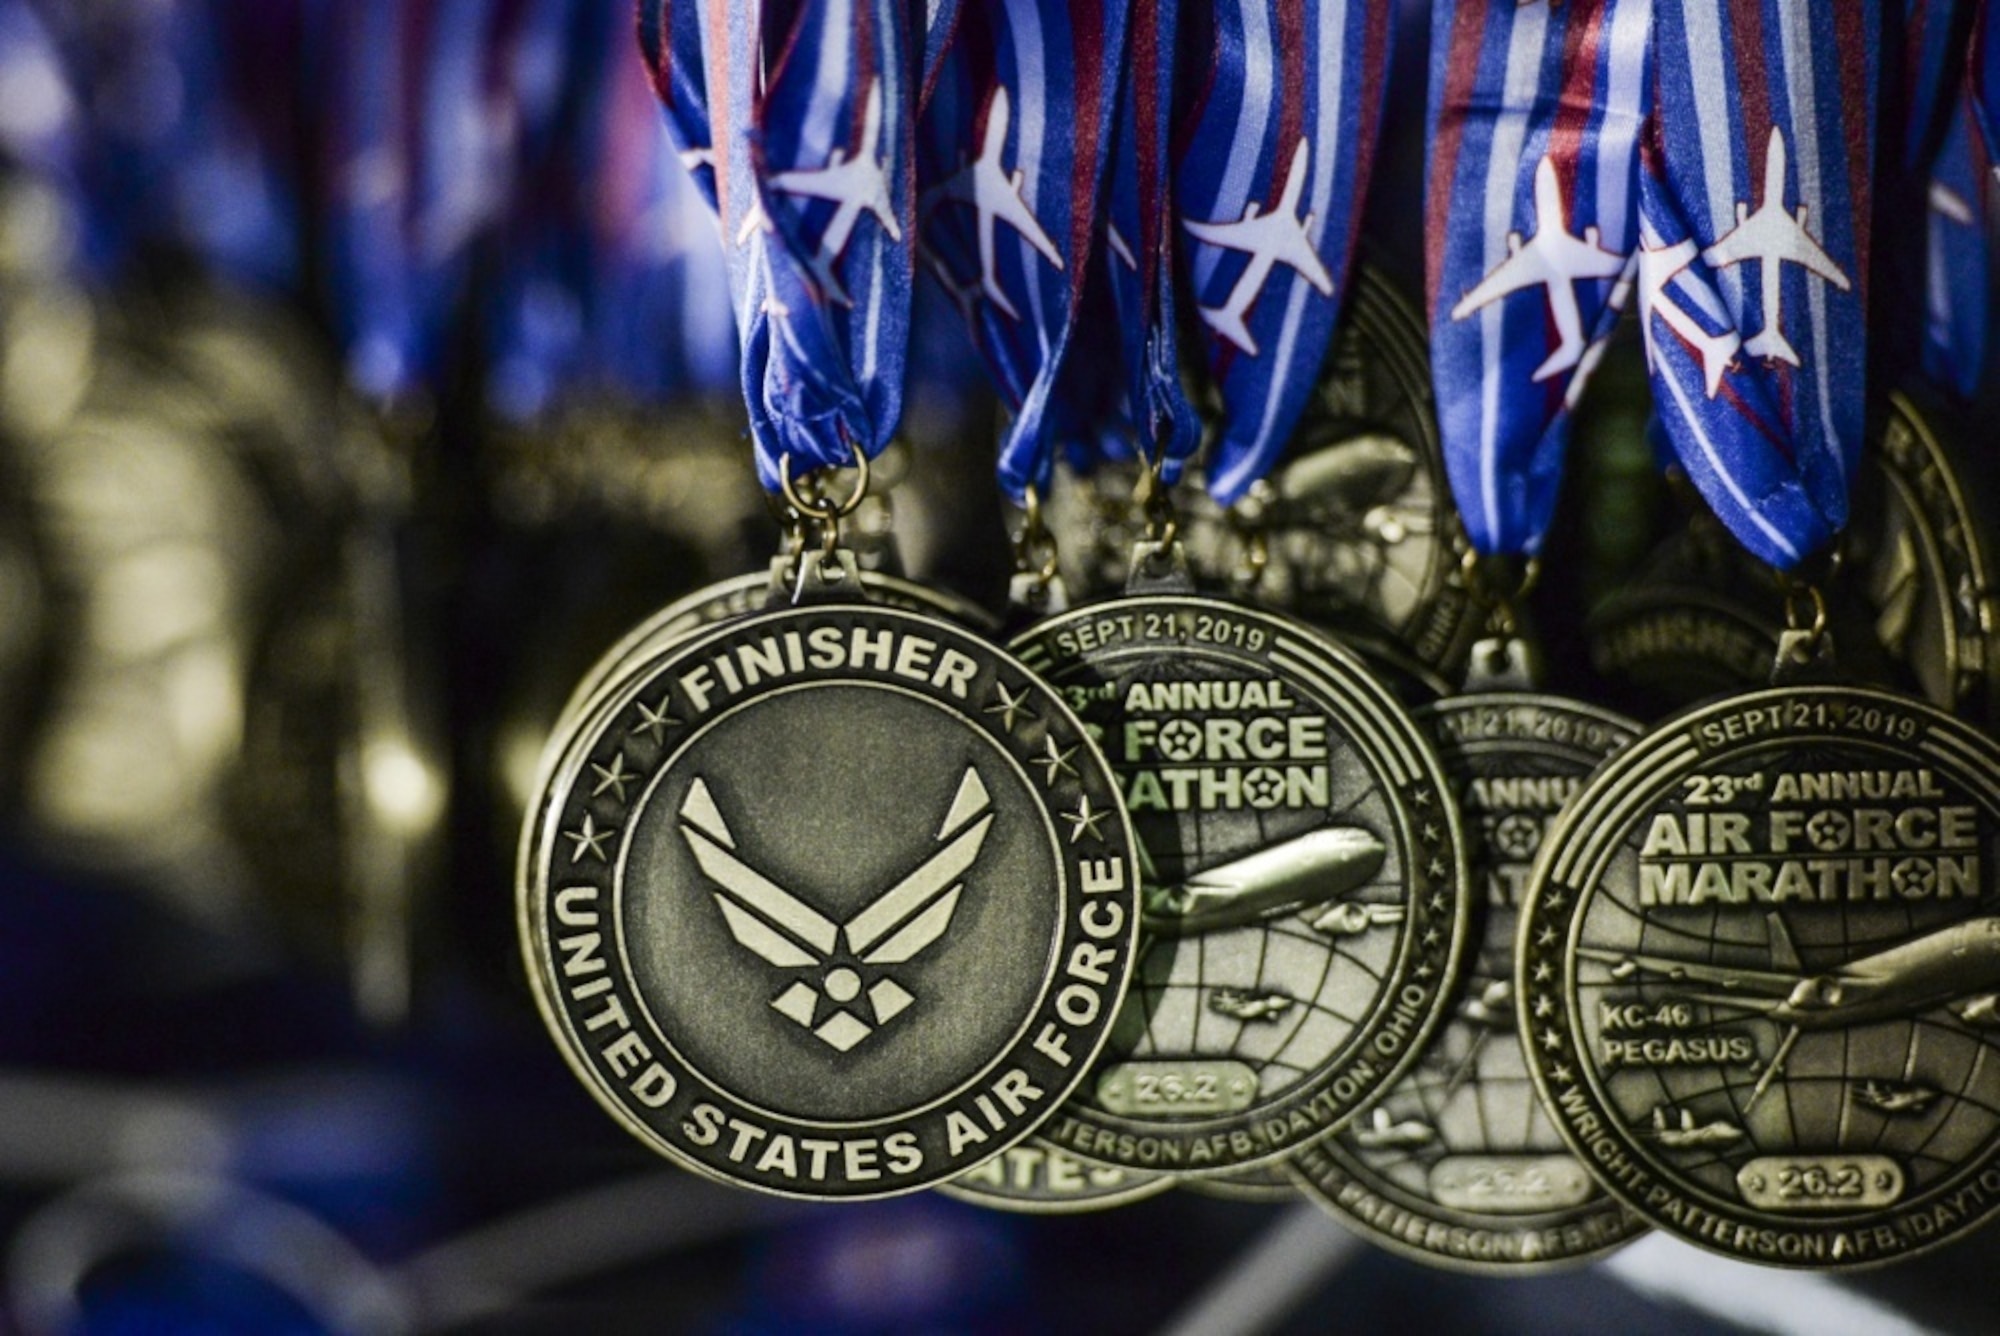 Due to the impact of the COVID-19 pandemic, to protect the health and safety for over 25,000 participants, volunteers and guests, with the exception of the virtual race, Air Force officials have cancelled the 2020 Air Force Marathon scheduled for Saturday, Sept. 19. Runners can still virtually complete the Air Force Marathon, half marathon, 10K, 5K, Tailwind Trot or Fly! Fight! Win! Challenge Series race. Runners will run their selected distance between Sept. 1-30. (U.S. Air Force photo/Wesley Farnsworth)